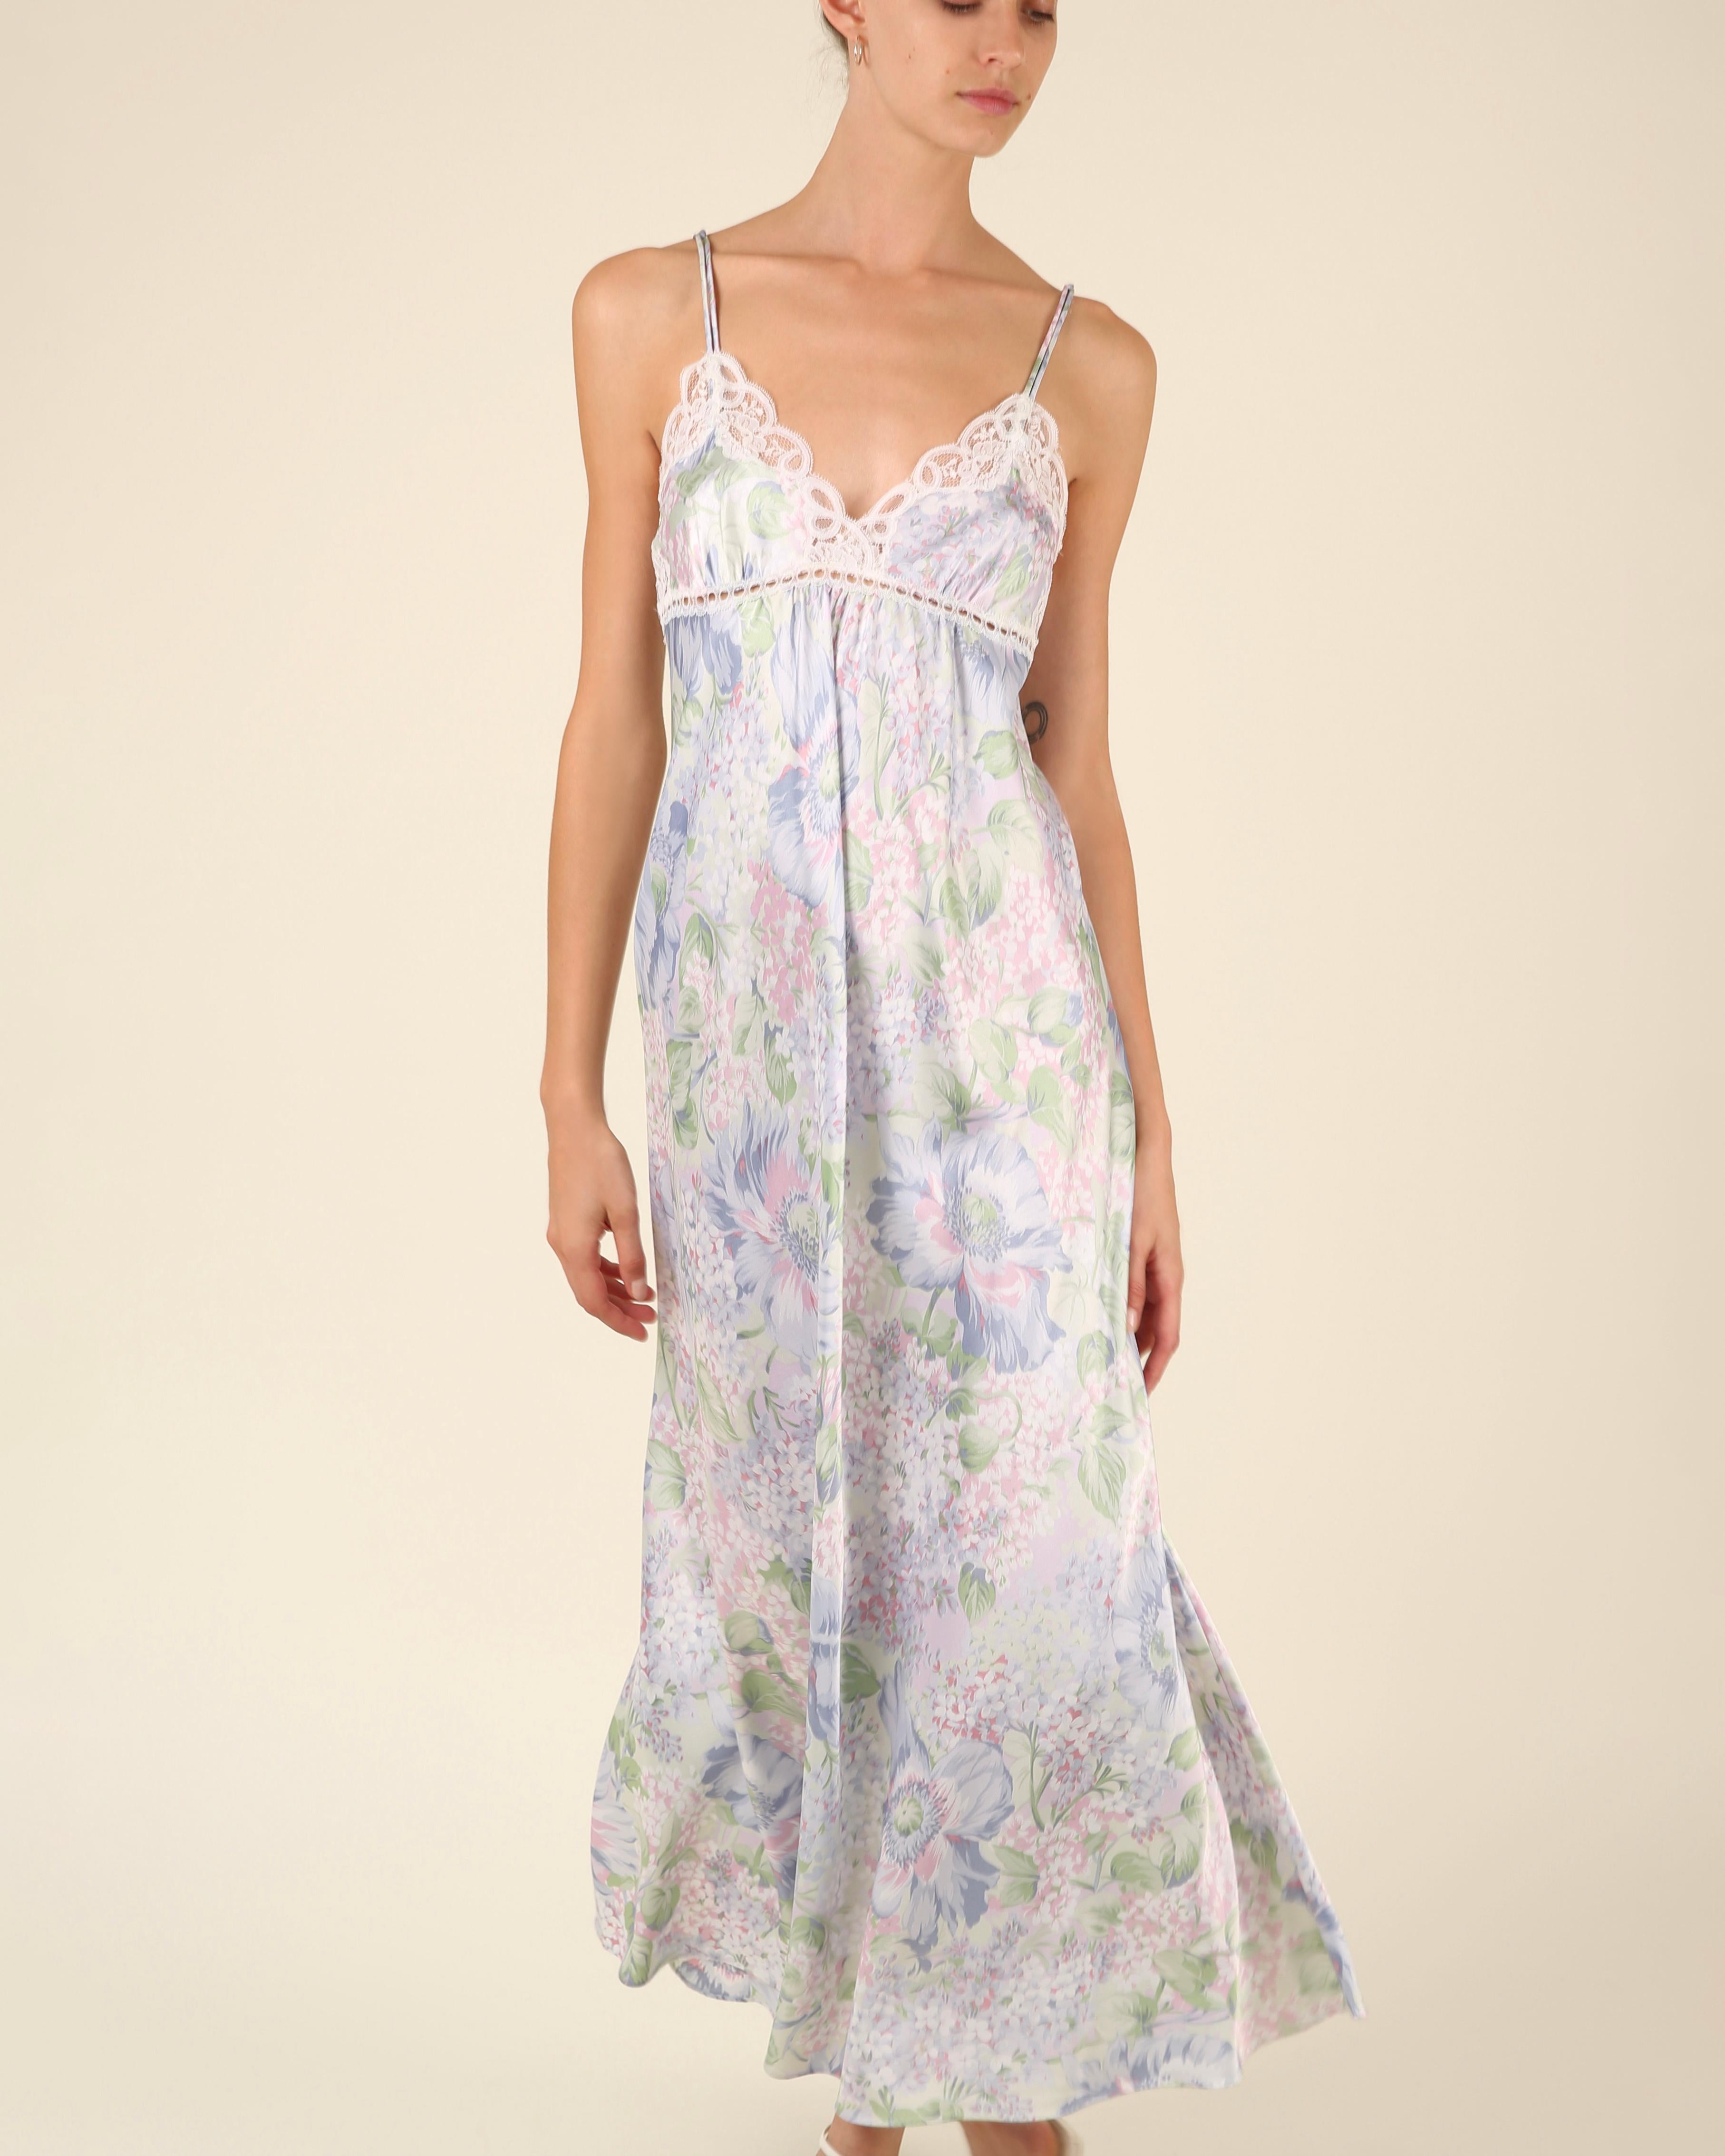 Christian Dior vintage silky lilac floral print lace night gown slip maxi dress For Sale 3